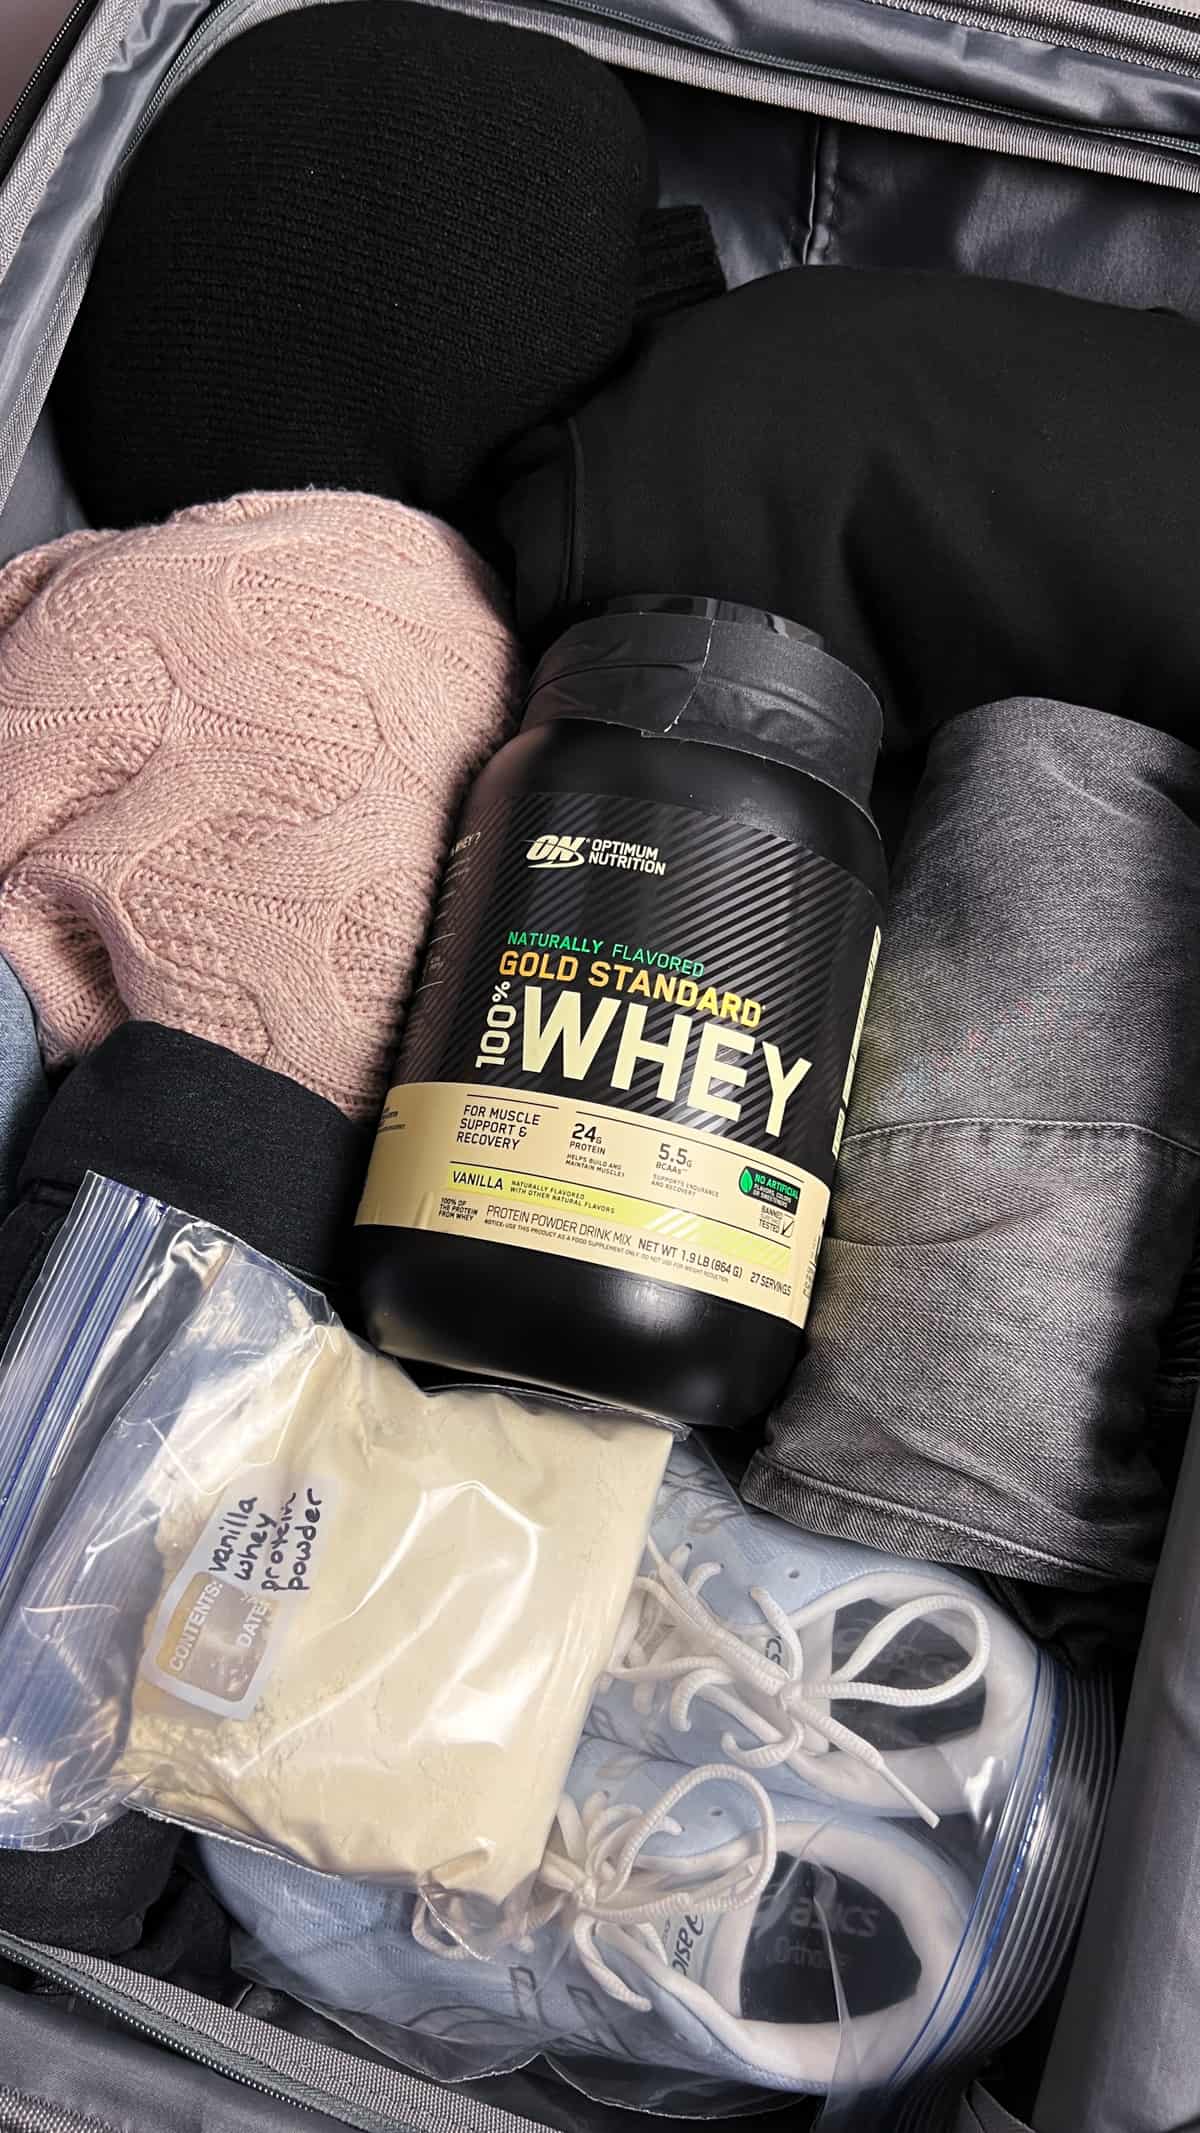 opened luggage showing clothing, sneakers, a bag of protein powder and a tub of protein powder.